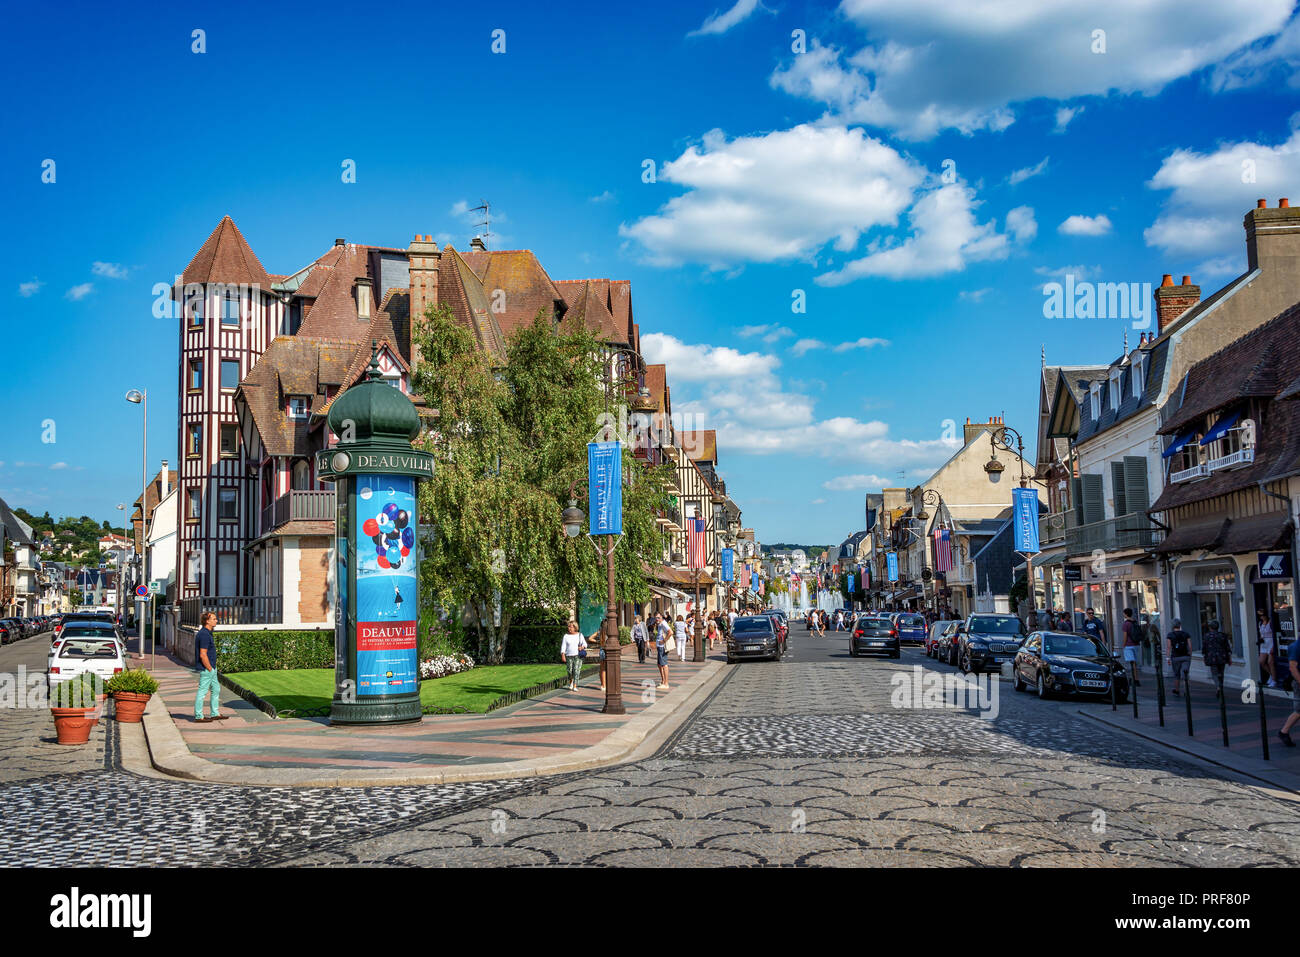 Streets of Deauville, France during the 44th Deauville American Film festival Stock Photo